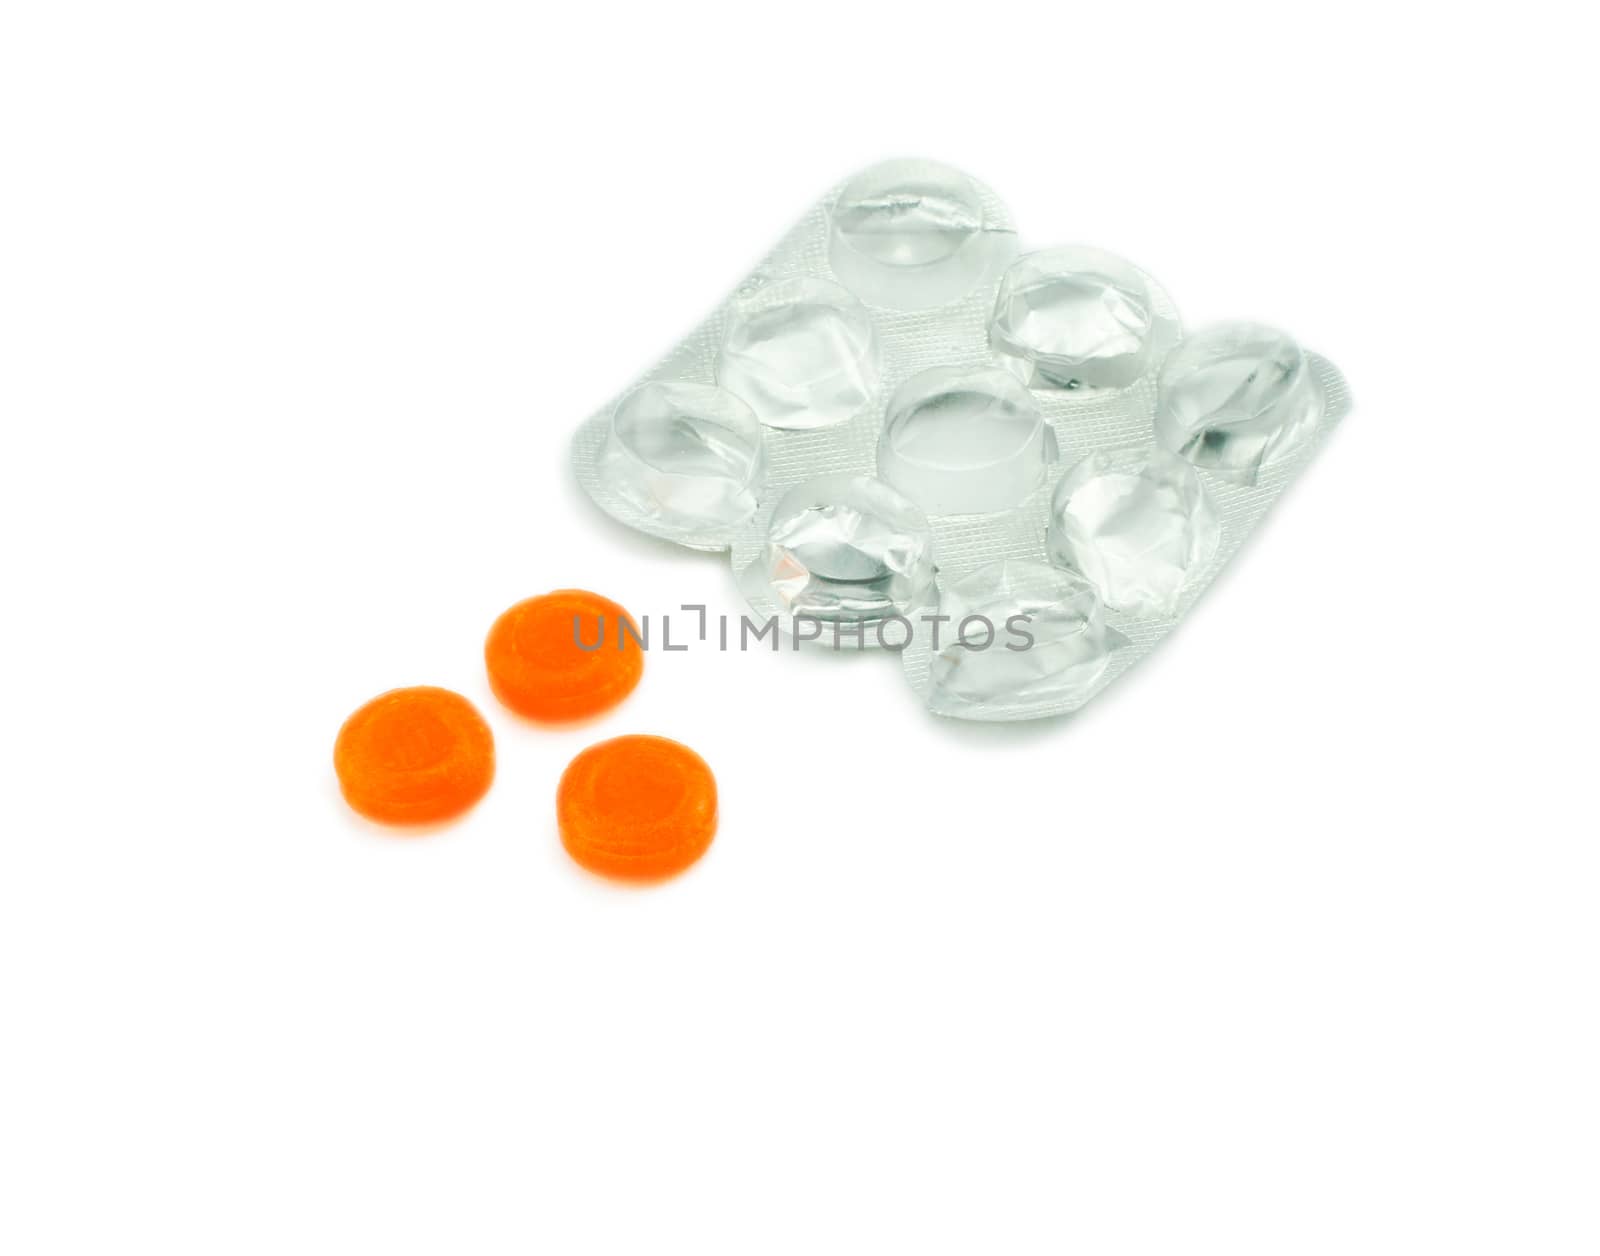 pills isolated on white background. For your commercial and editorial use.